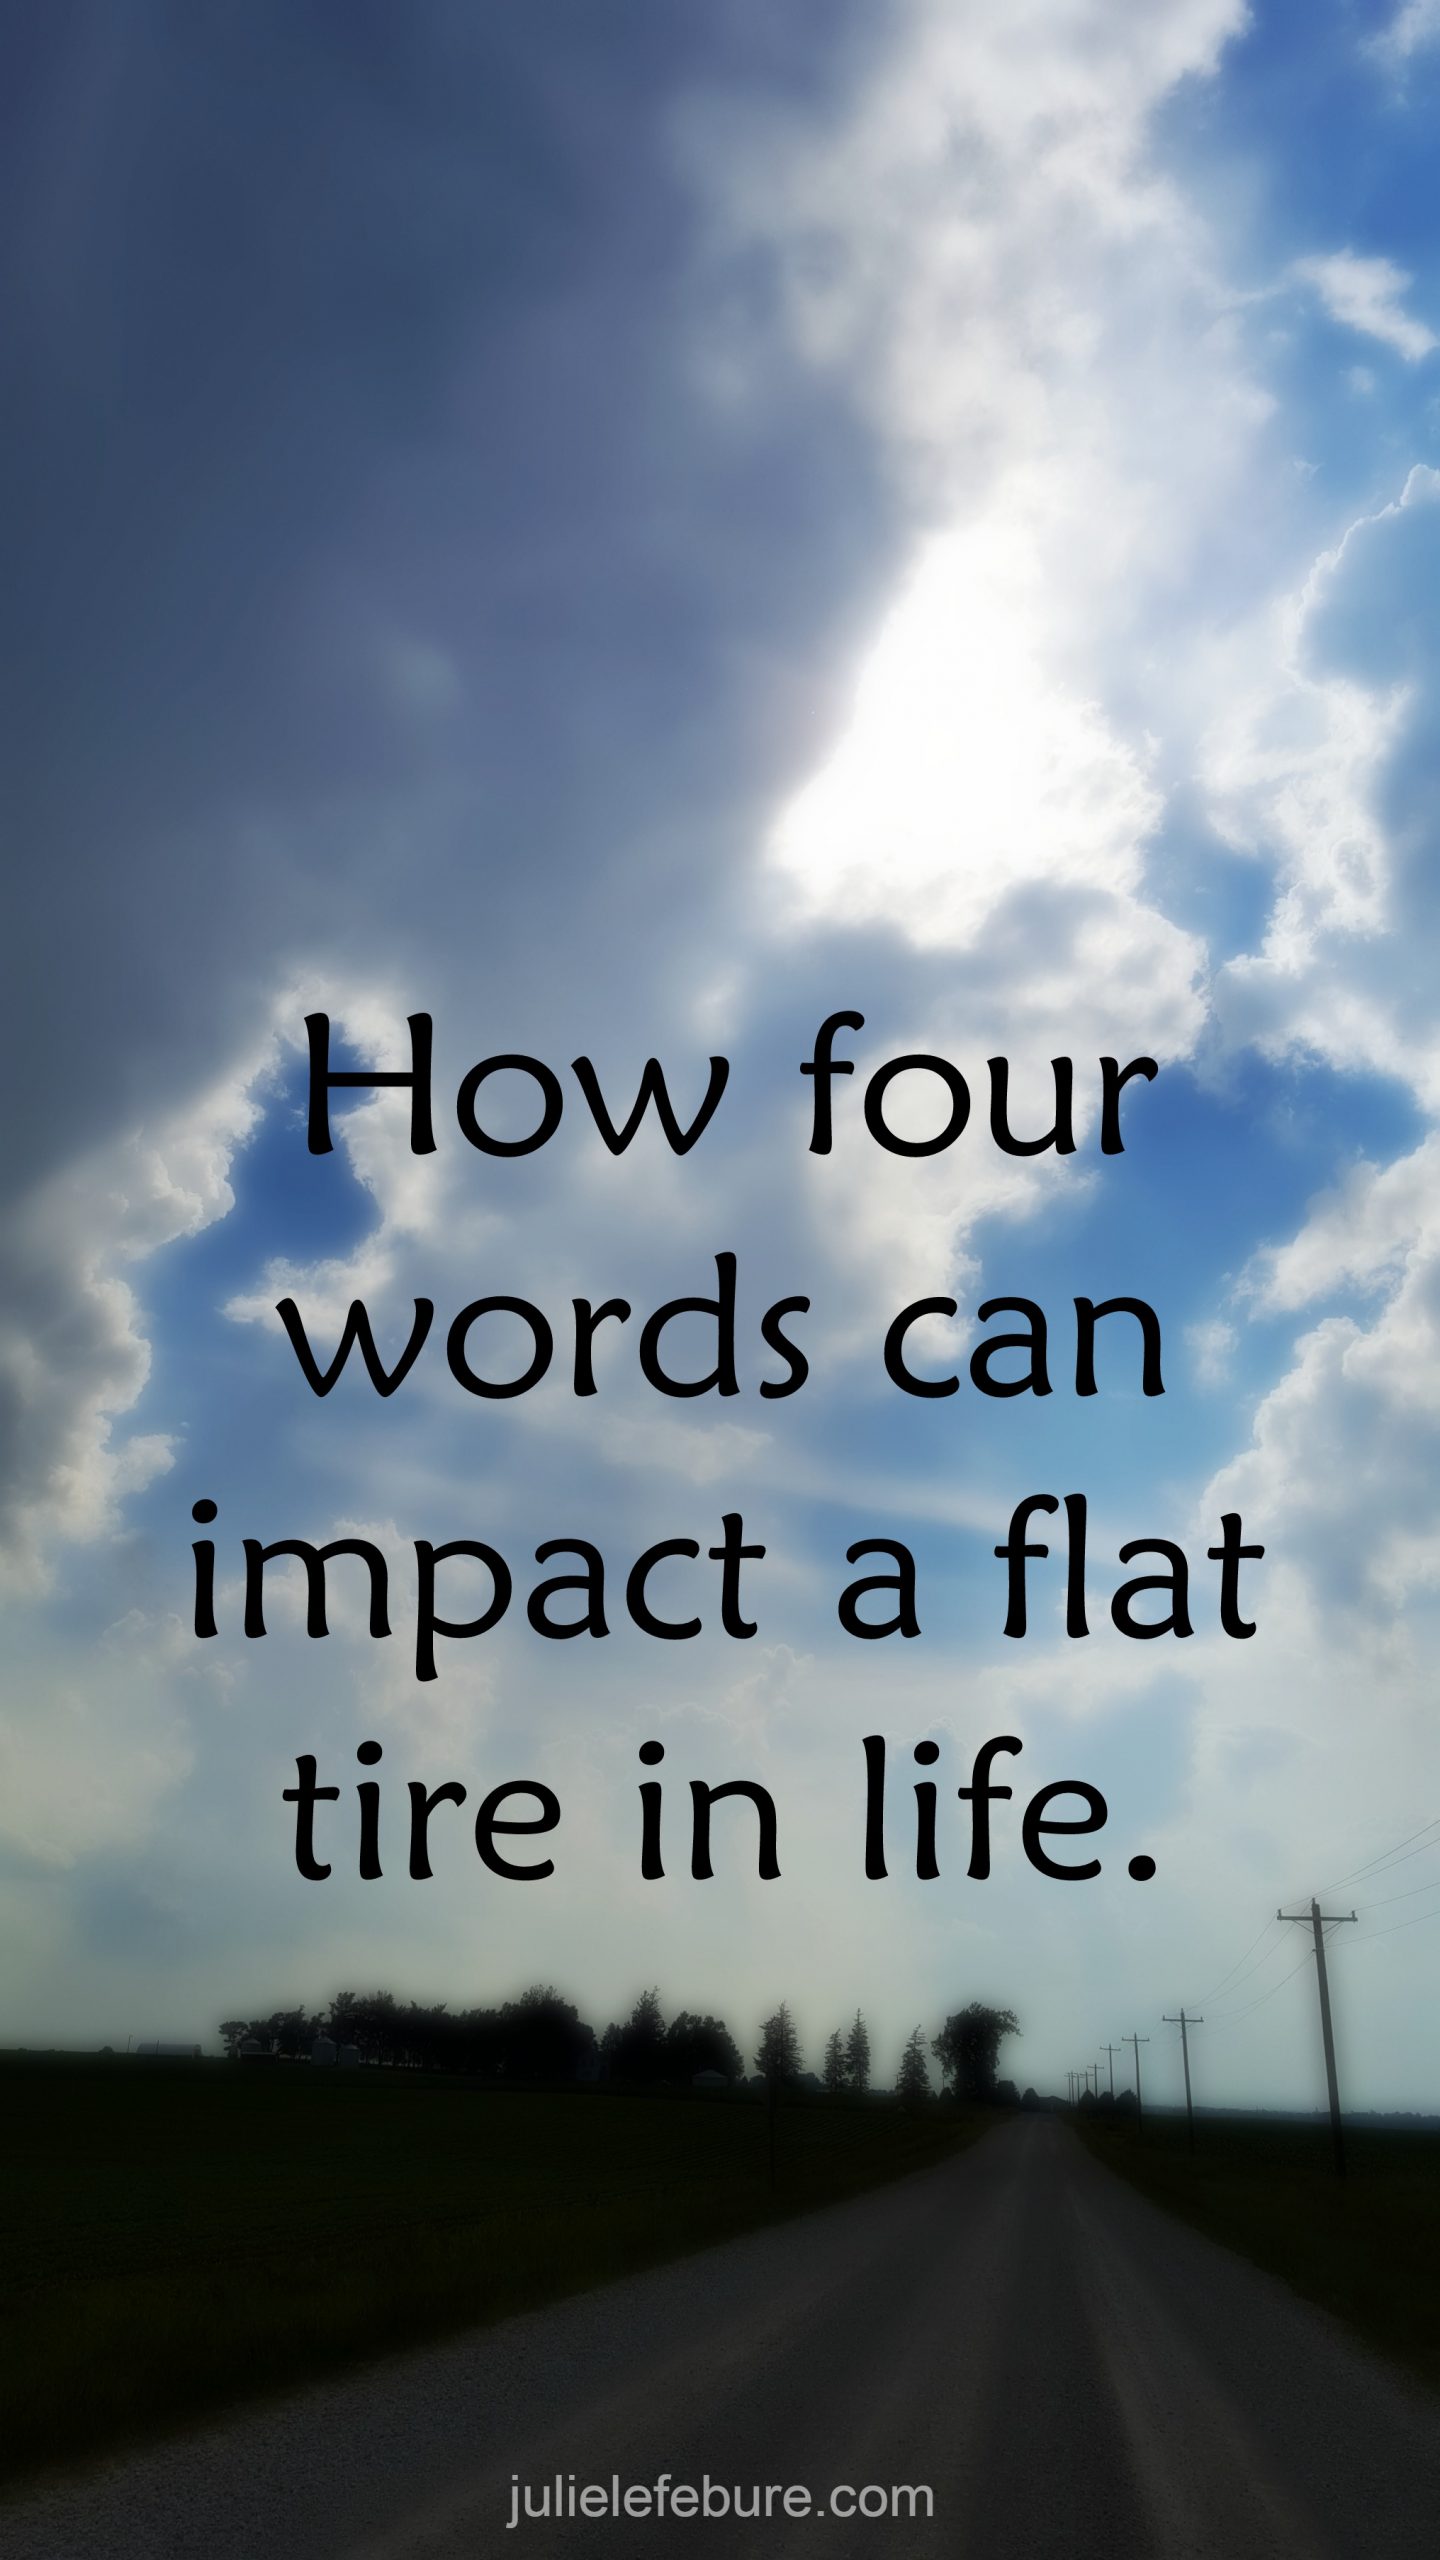 How Four Words Can Impact A Flat Tire In Life